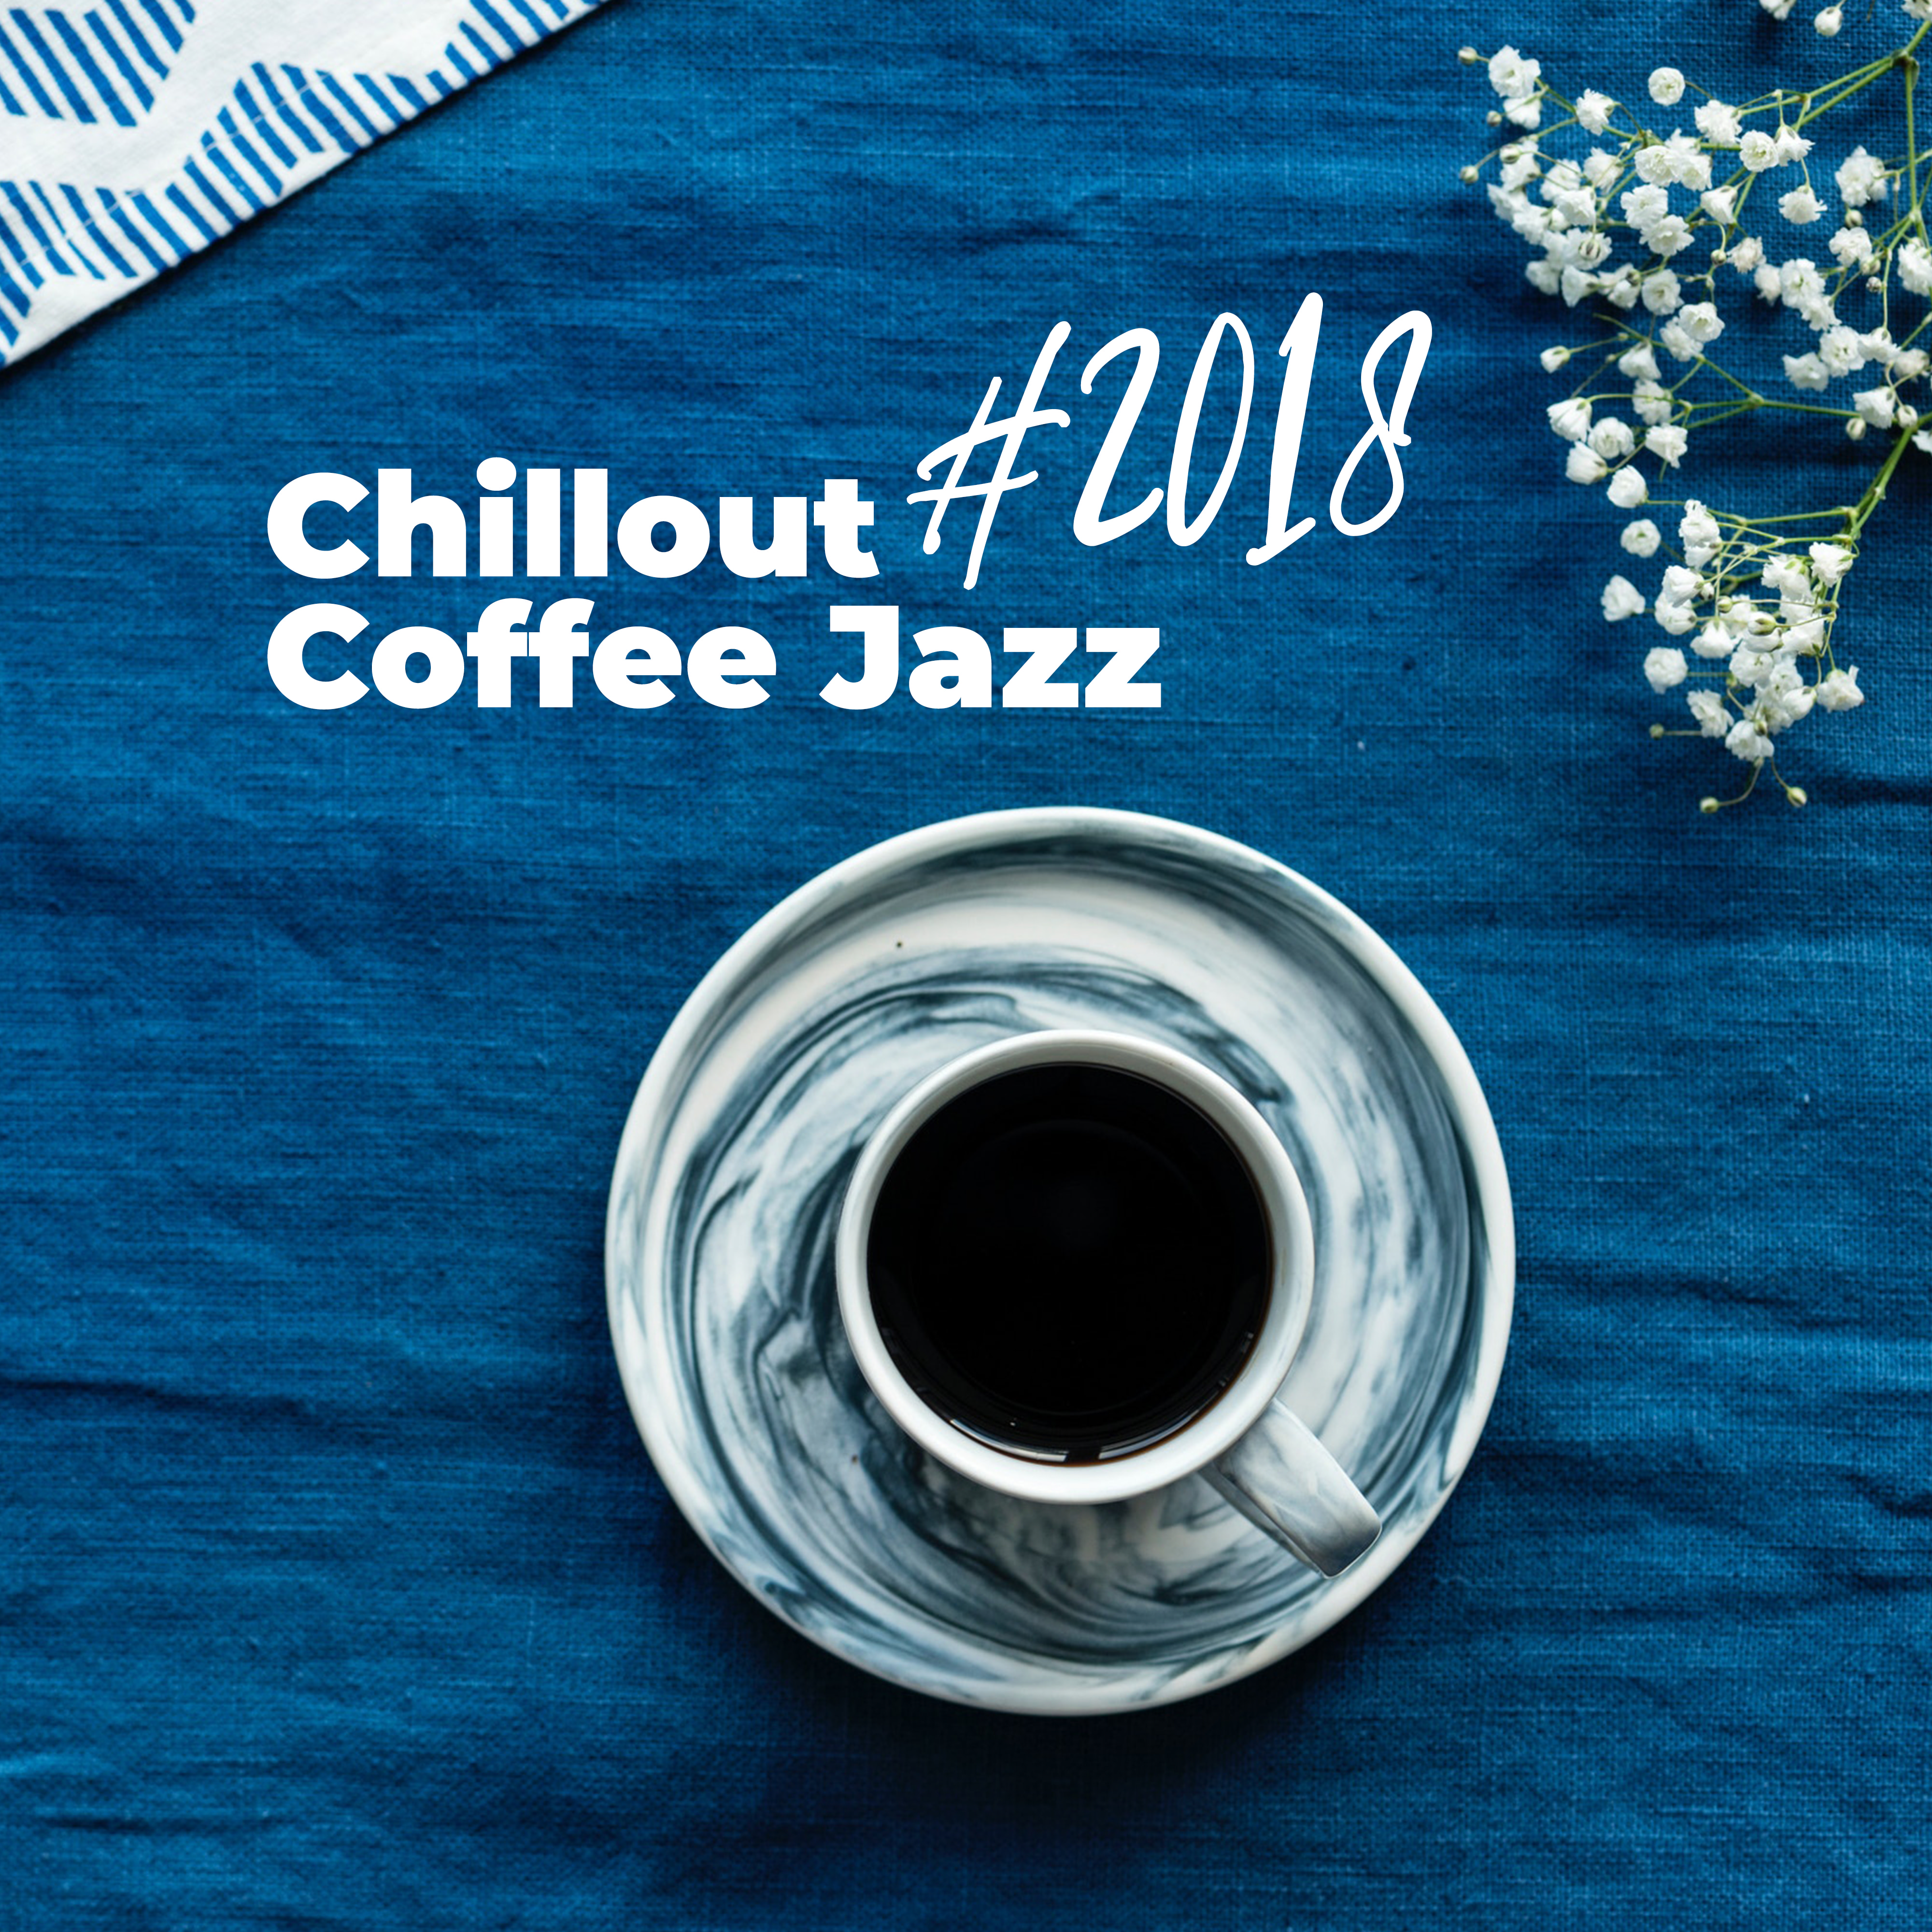 #2018 Chillout Coffee Jazz